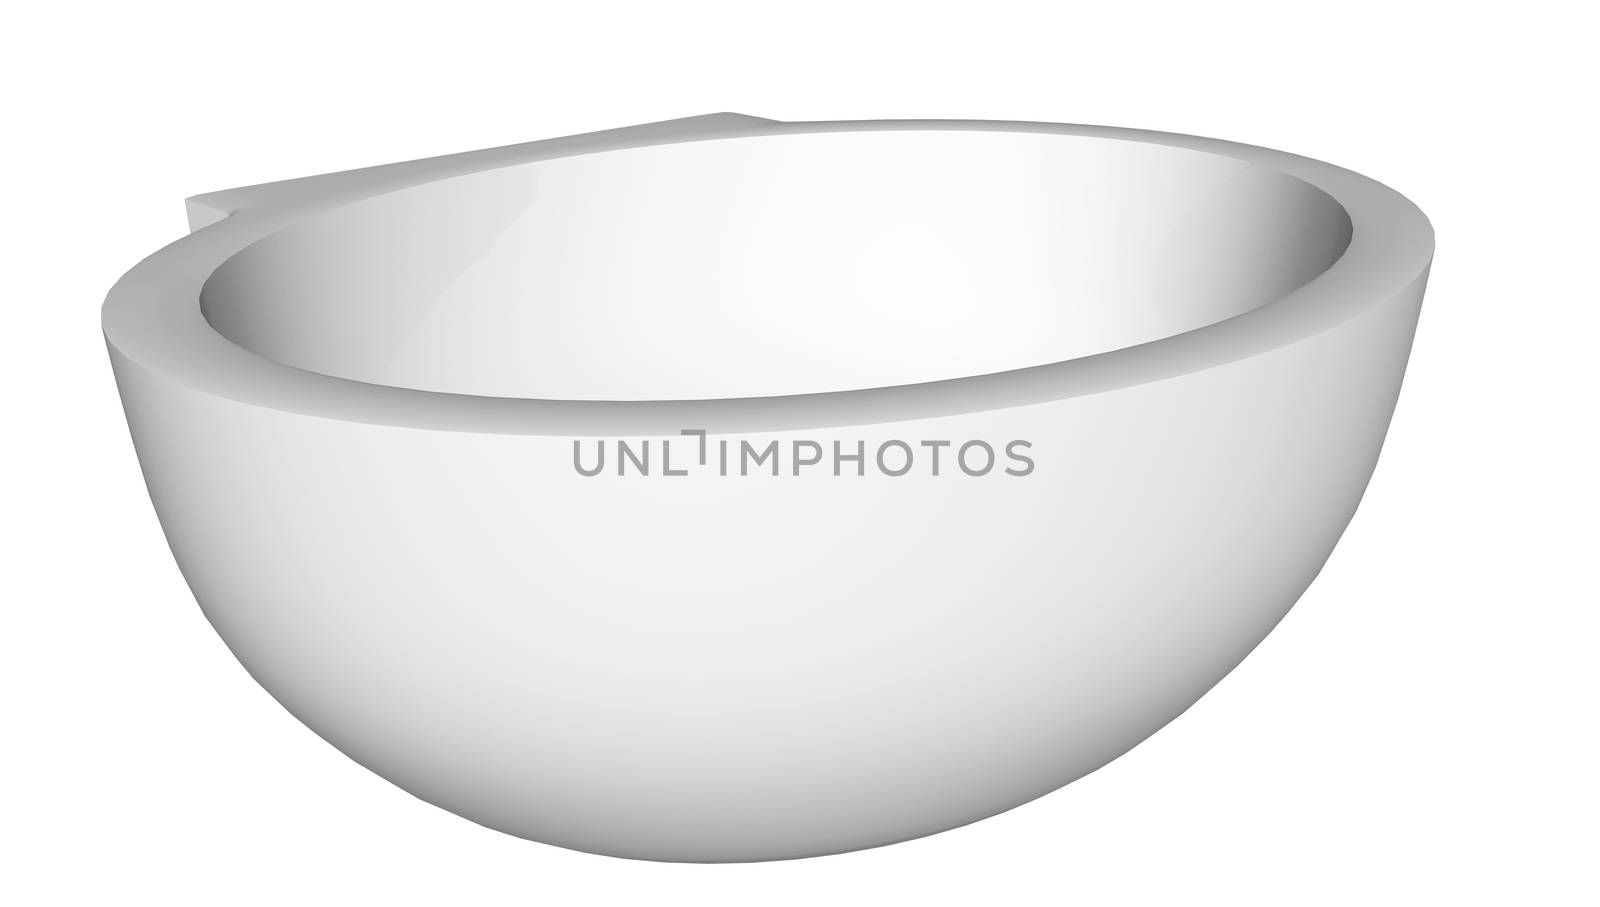 Modern egg-shapped washbasin or sink, isolated against a white background.